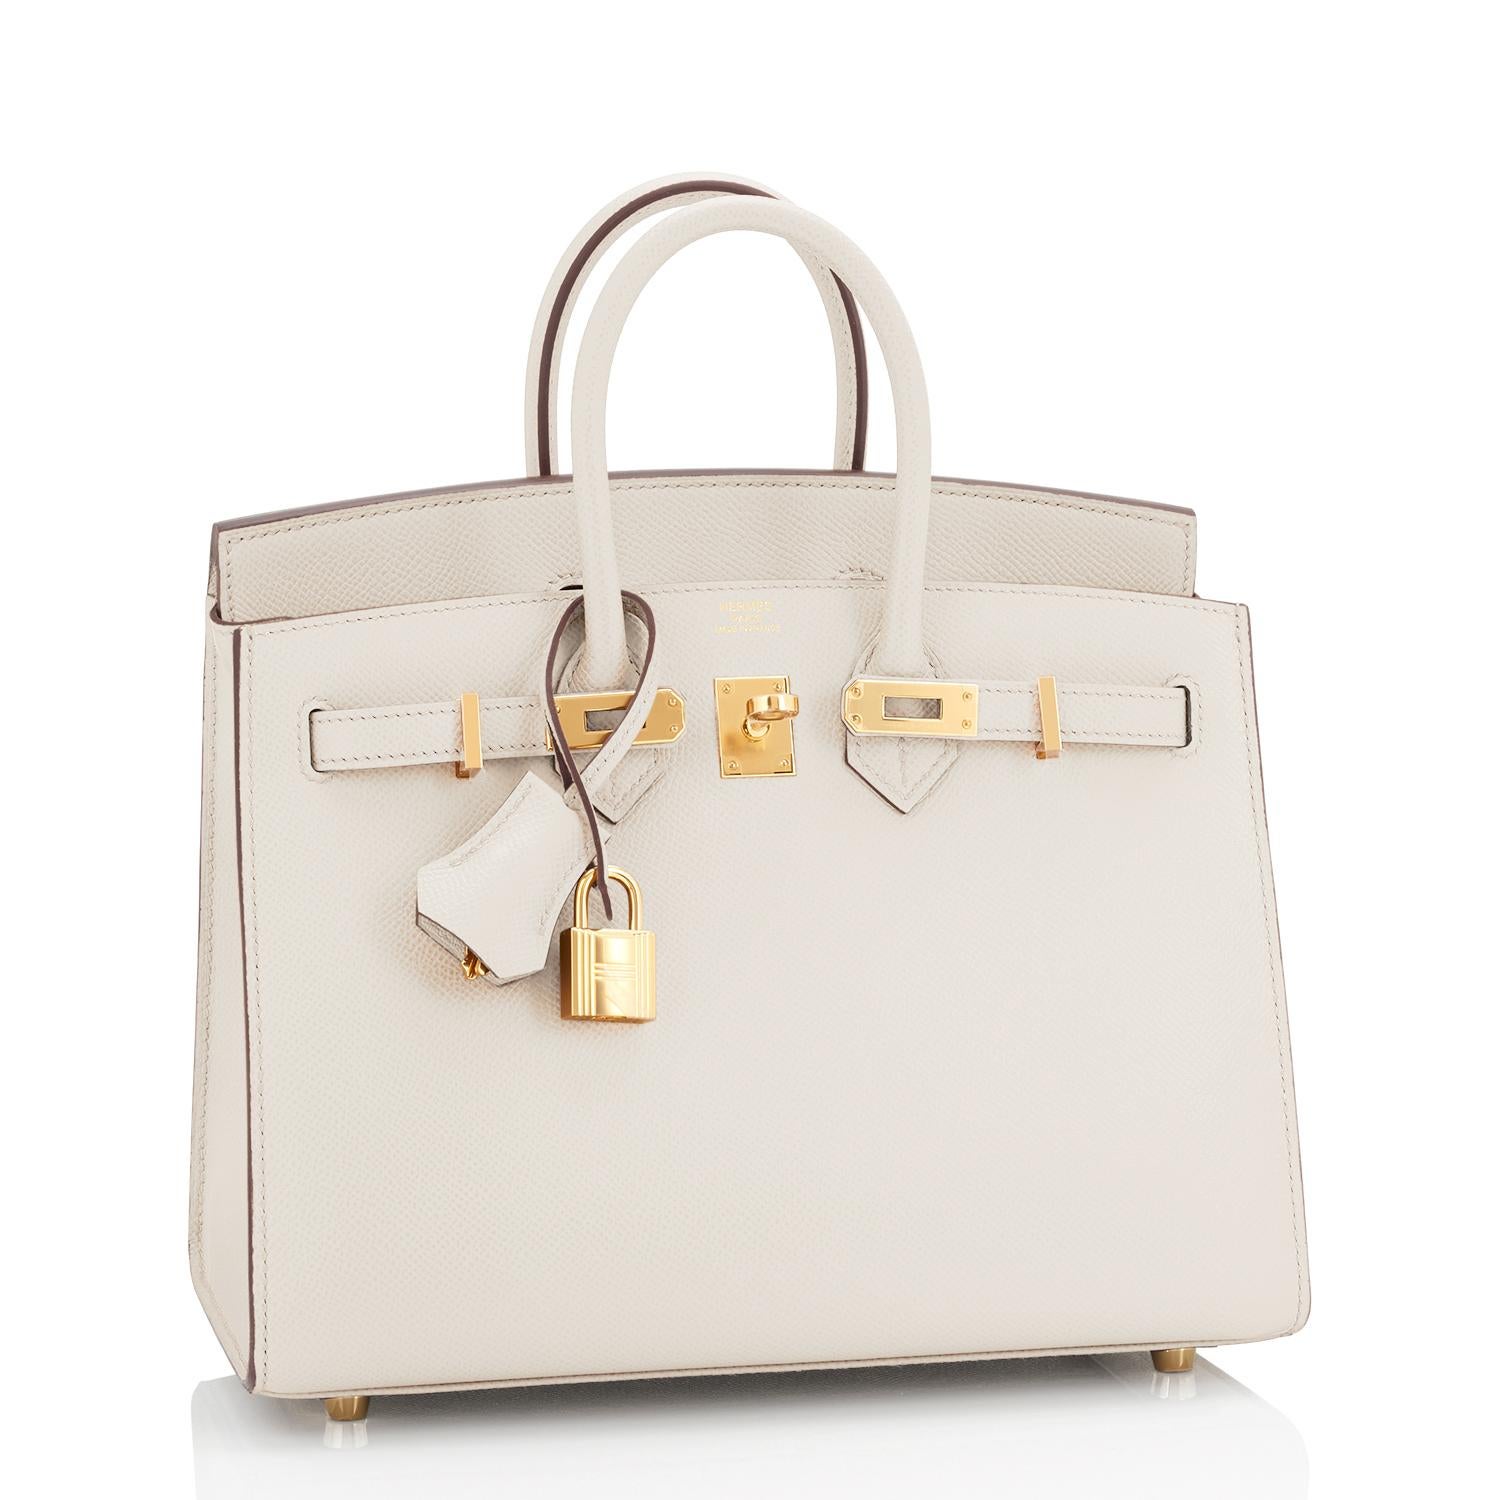 Hermes Birkin 25cm Sellier Nata Off White Cream Gold Hardware U Stamp, 2022
Do not miss this perfect little jewel - the only Birkin you need this spring summer!
Just purchased from Hermes store; bag bears new 2022 interior U Stamp.
Brand New in Box.